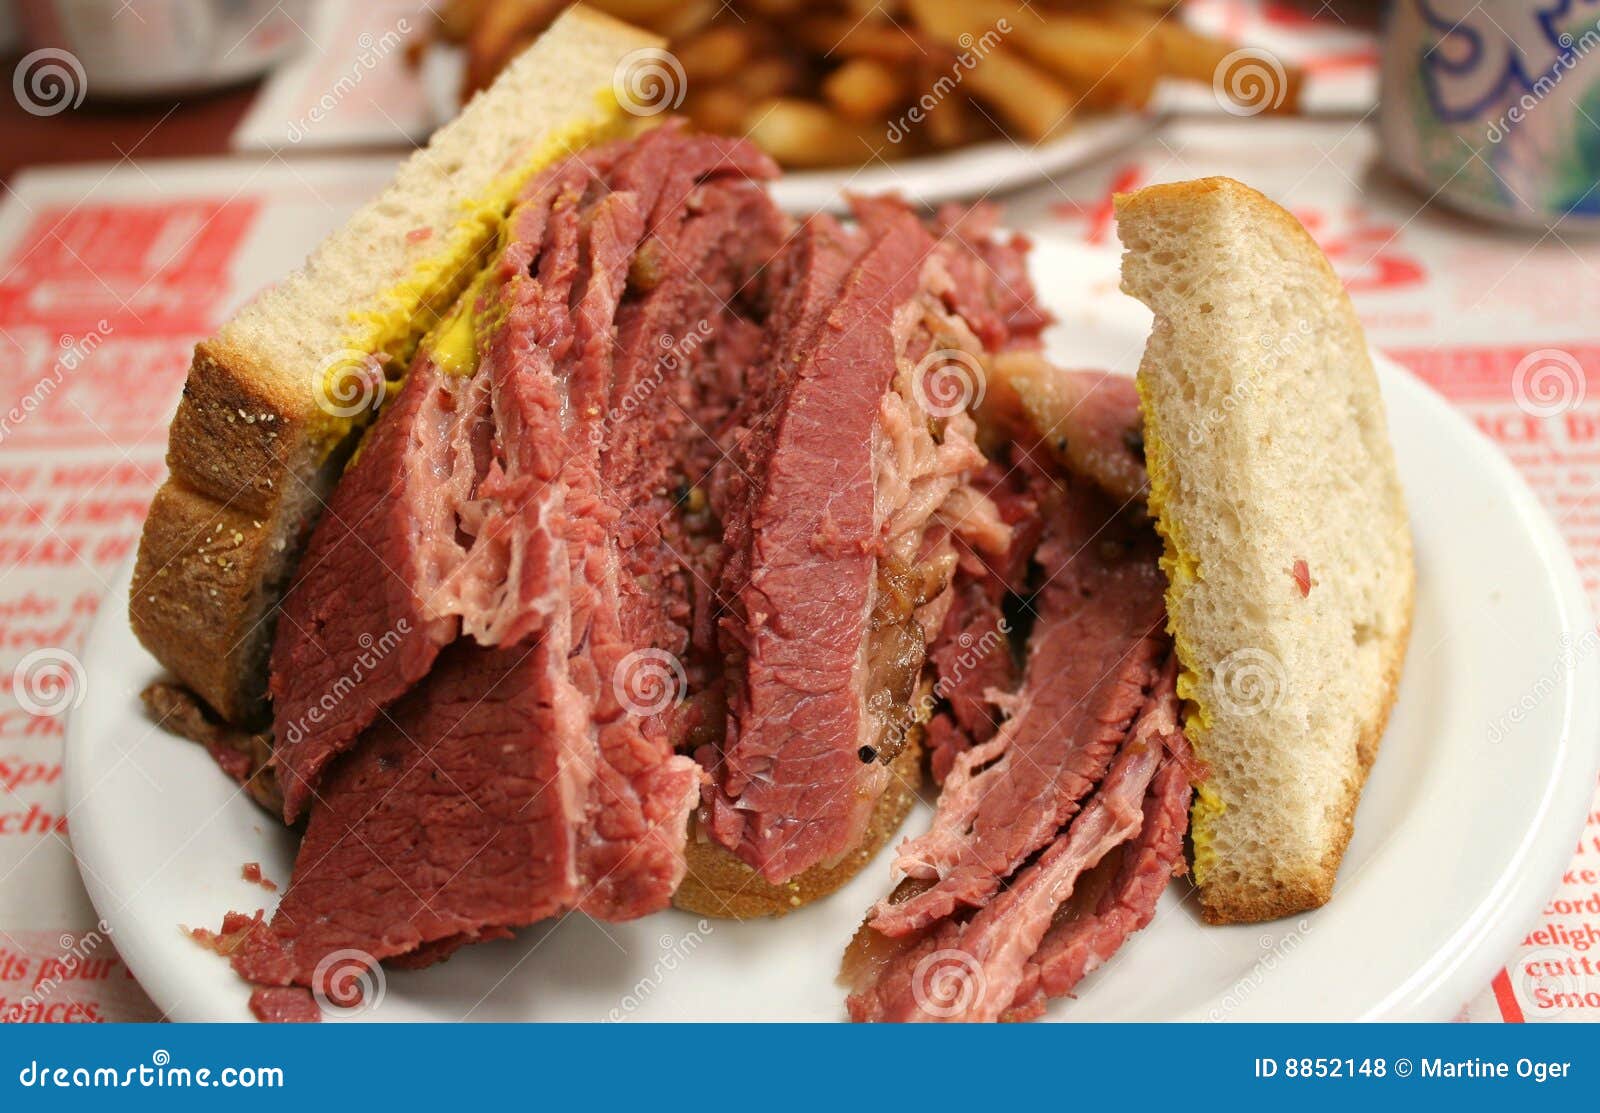 montreal smoked meat.